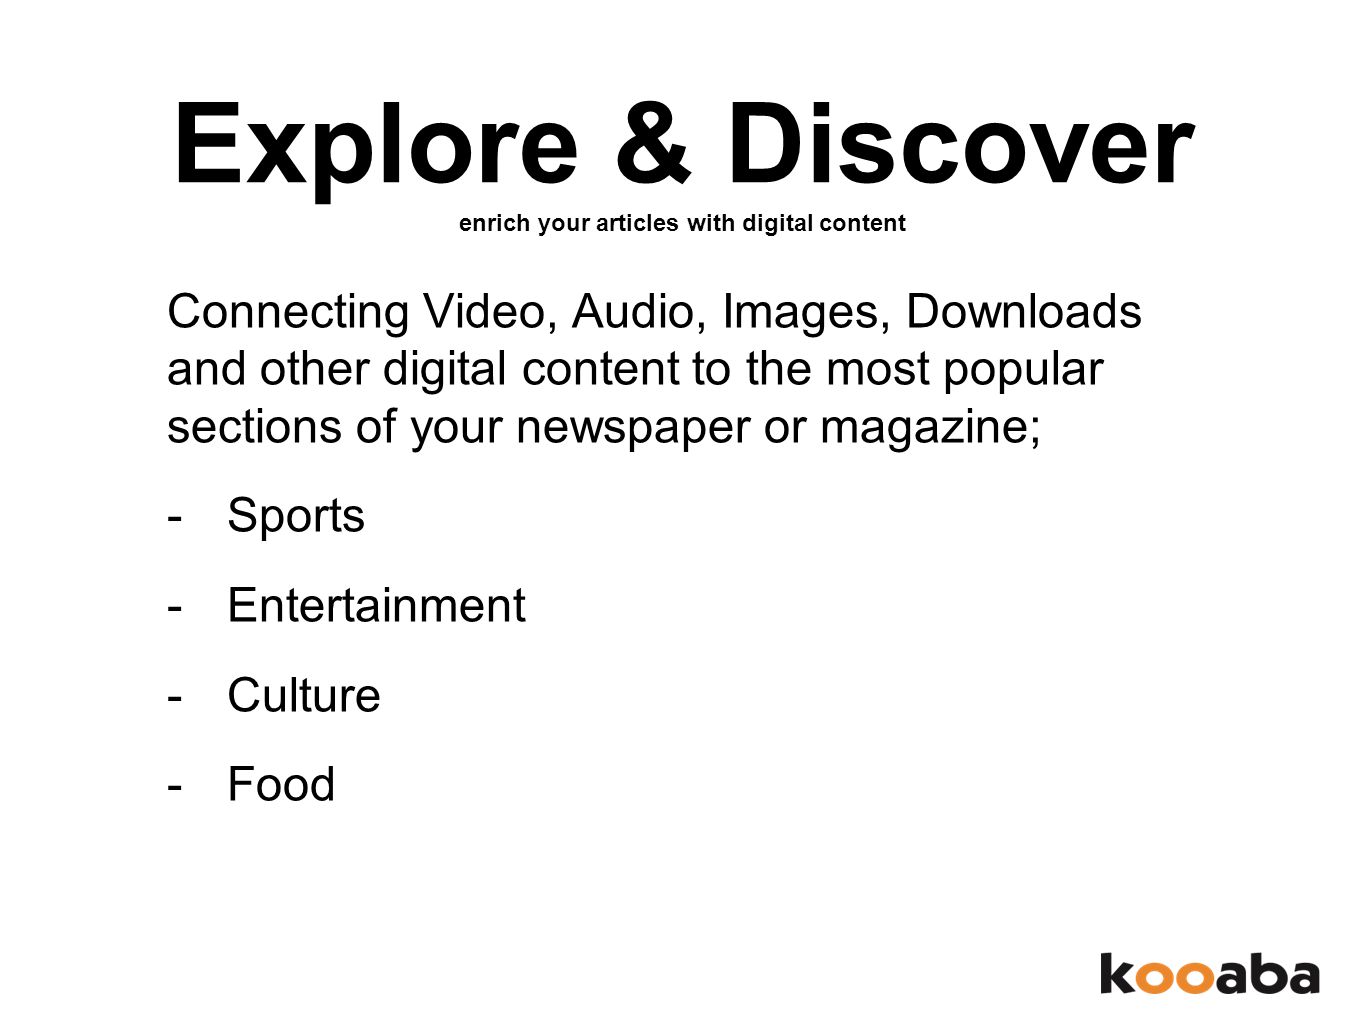 Explore & Discover enrich your articles with digital content Connecting Video, Audio, Images, Downloads and other digital content to the most popular sections of your newspaper or magazine; -Sports -Entertainment -Culture -Food